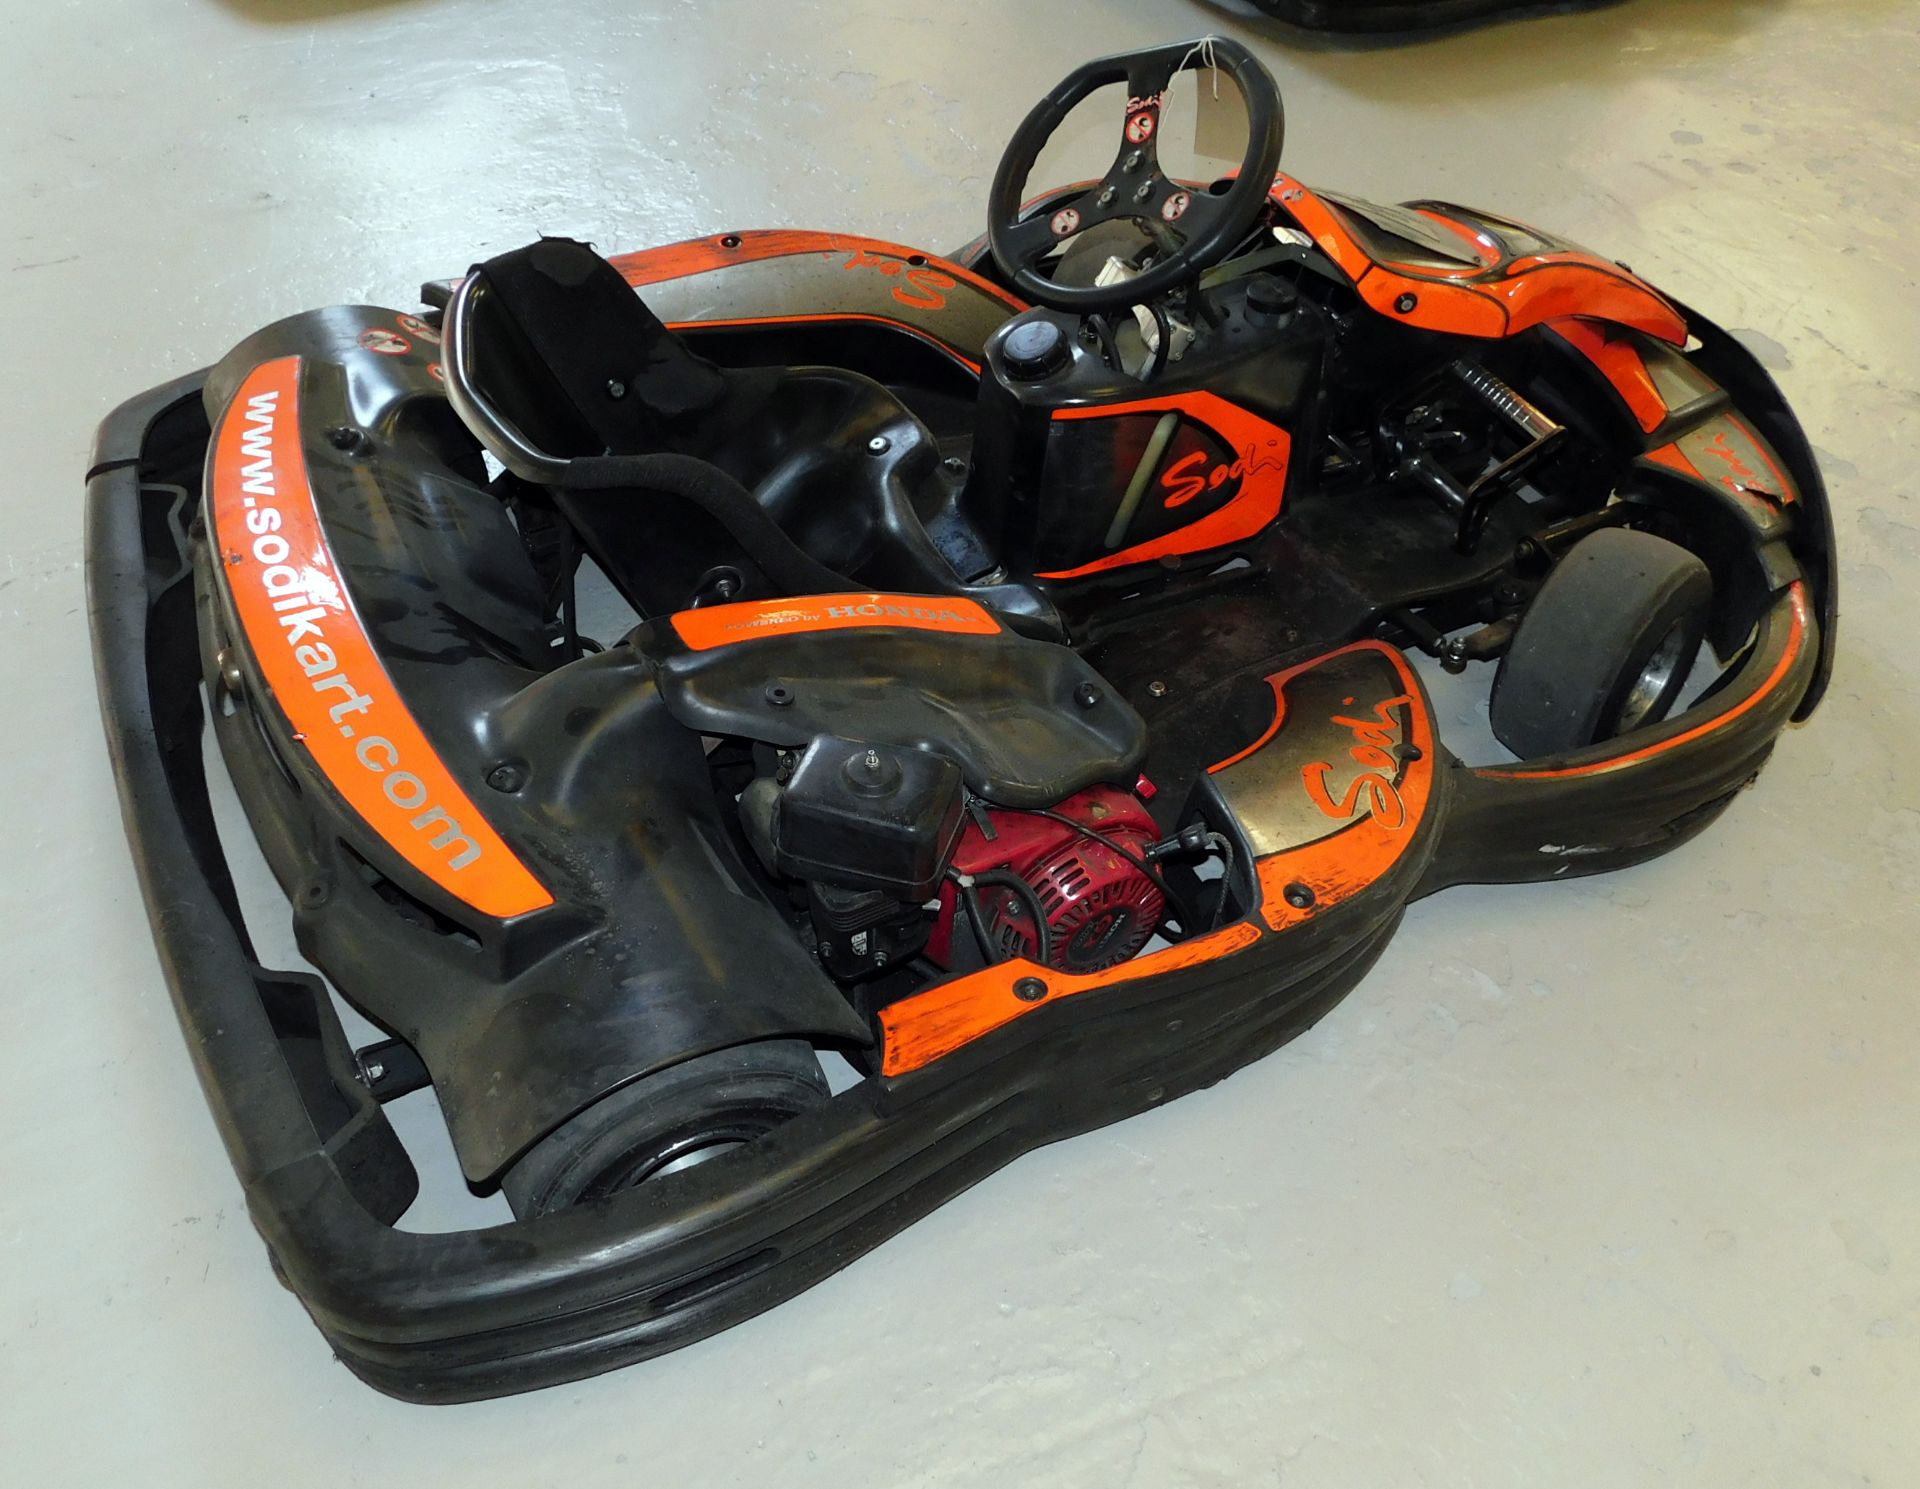 Sodi RX7 Petrol Powered Go-Kart with Honda GX200 Engine (located in Bredbury, collection Friday 20th - Image 4 of 5